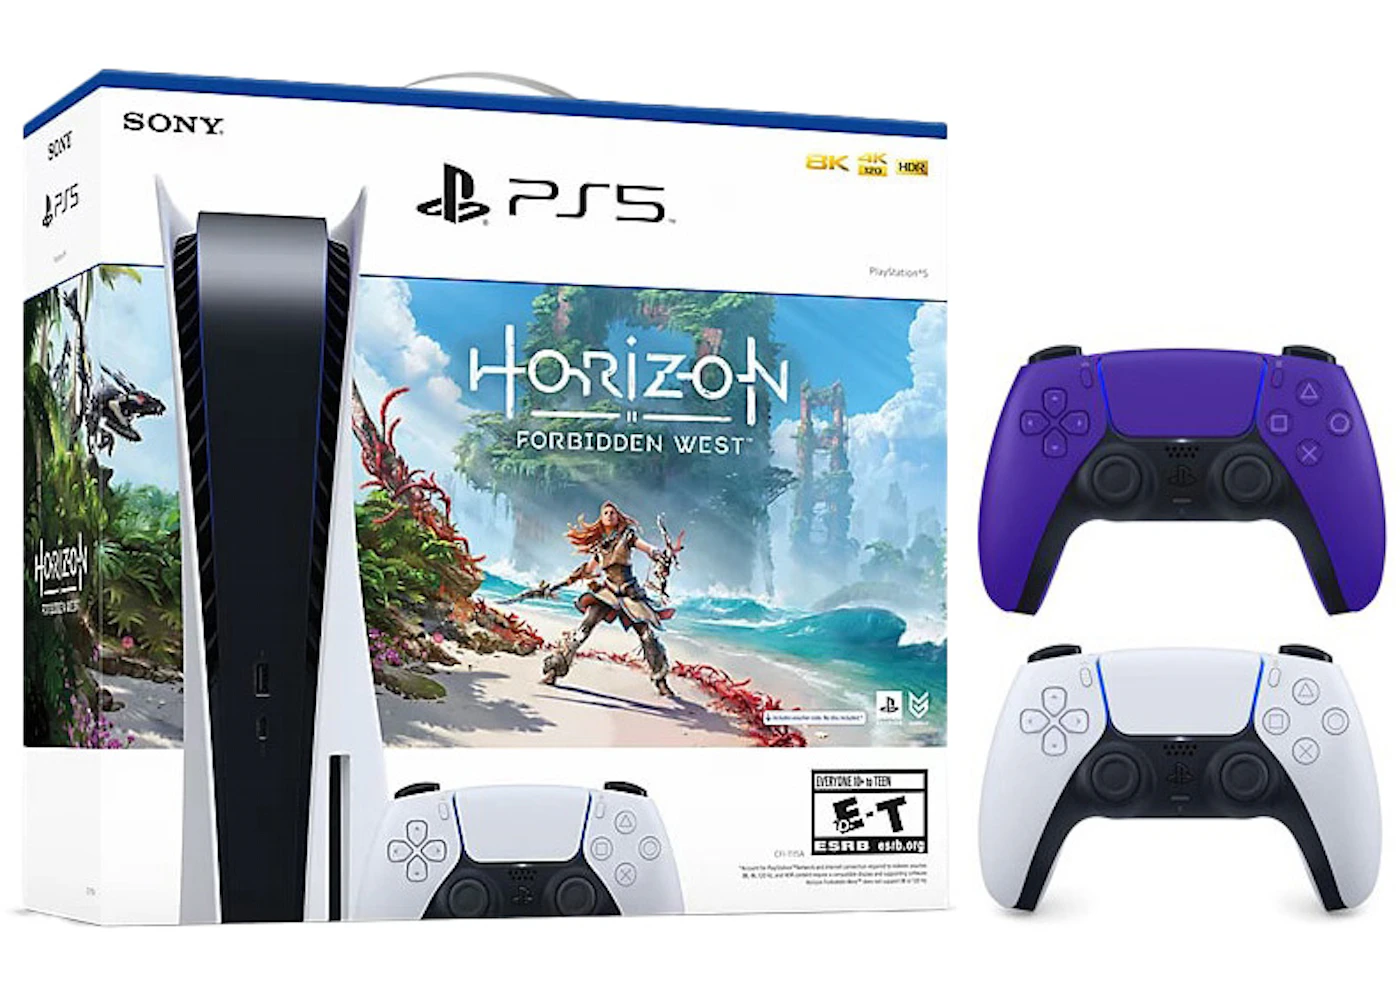 Sony Playstation 5 PS5 Horizon Forbidden West Blu-Ray Console with Extra  DualSense Wireless Controller Bundle (US Plug)  1000032115/1000032000-3006396 Glactic Purple - US